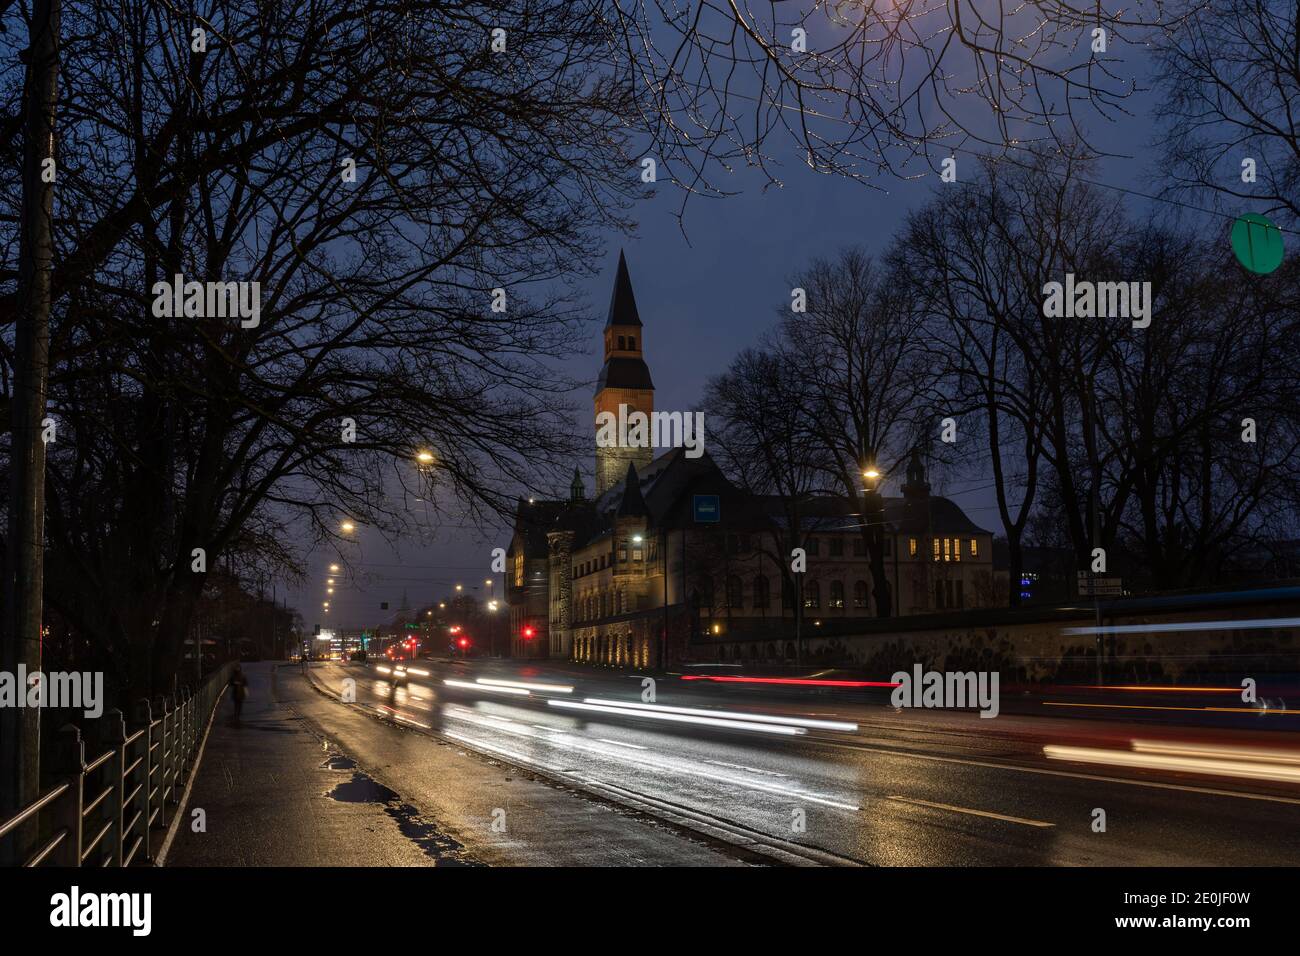 National Museum and Mannerheimintie after dark on a rainy night in Helsinki, Finland Stock Photo